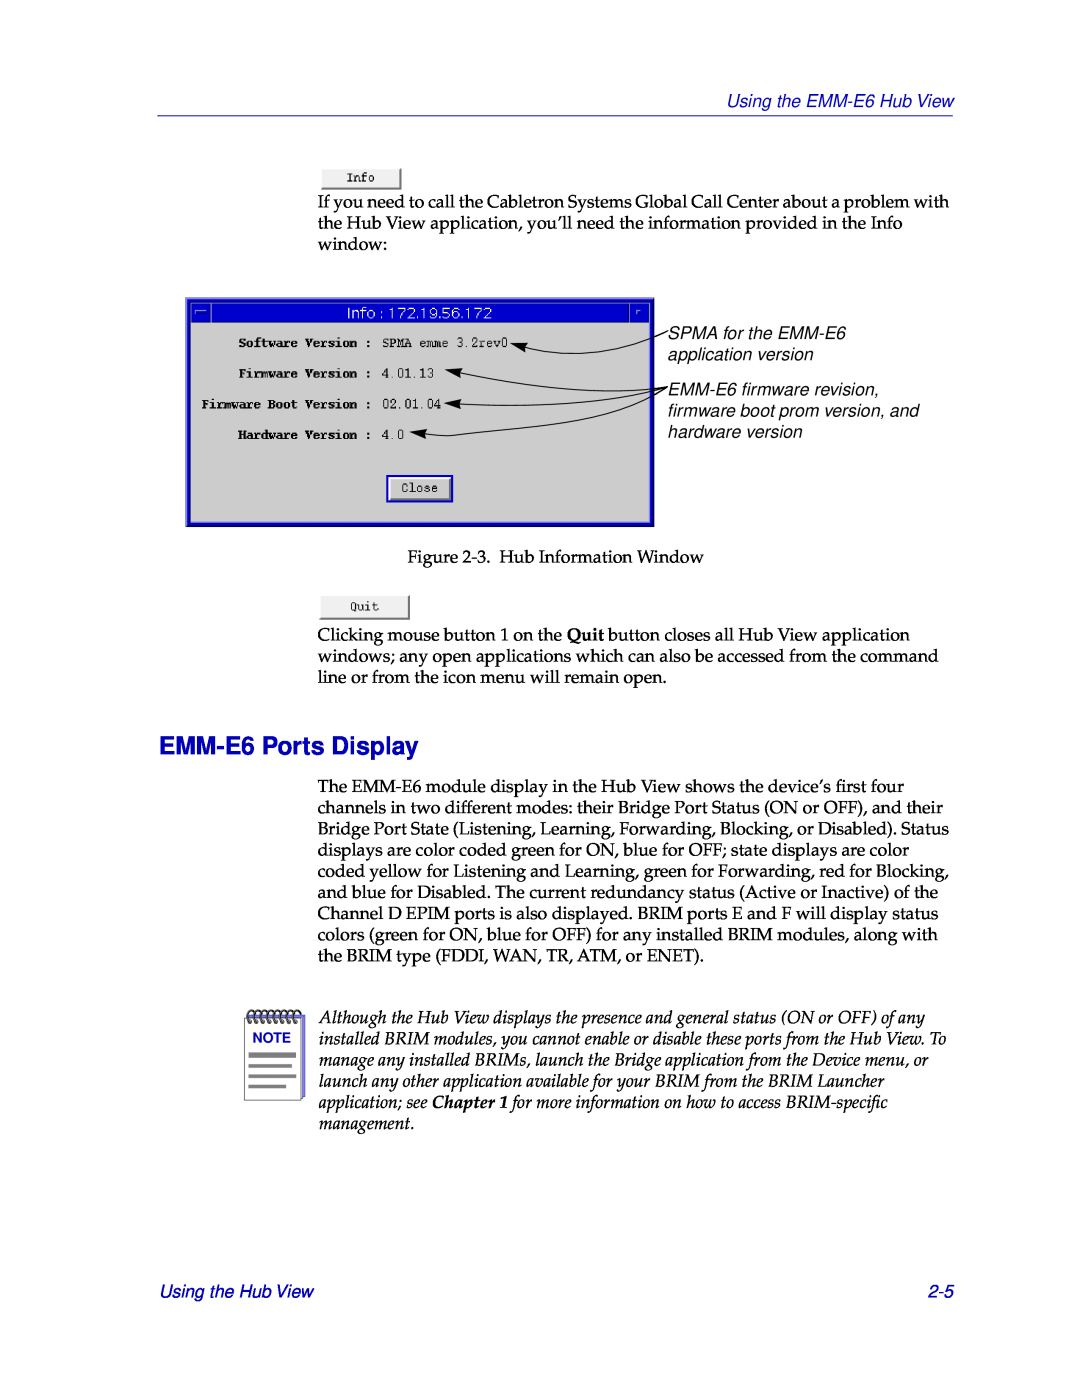 Cabletron Systems manual EMM-E6 Ports Display, SPMA for the EMM-E6 application version, Using the EMM-E6 Hub View 